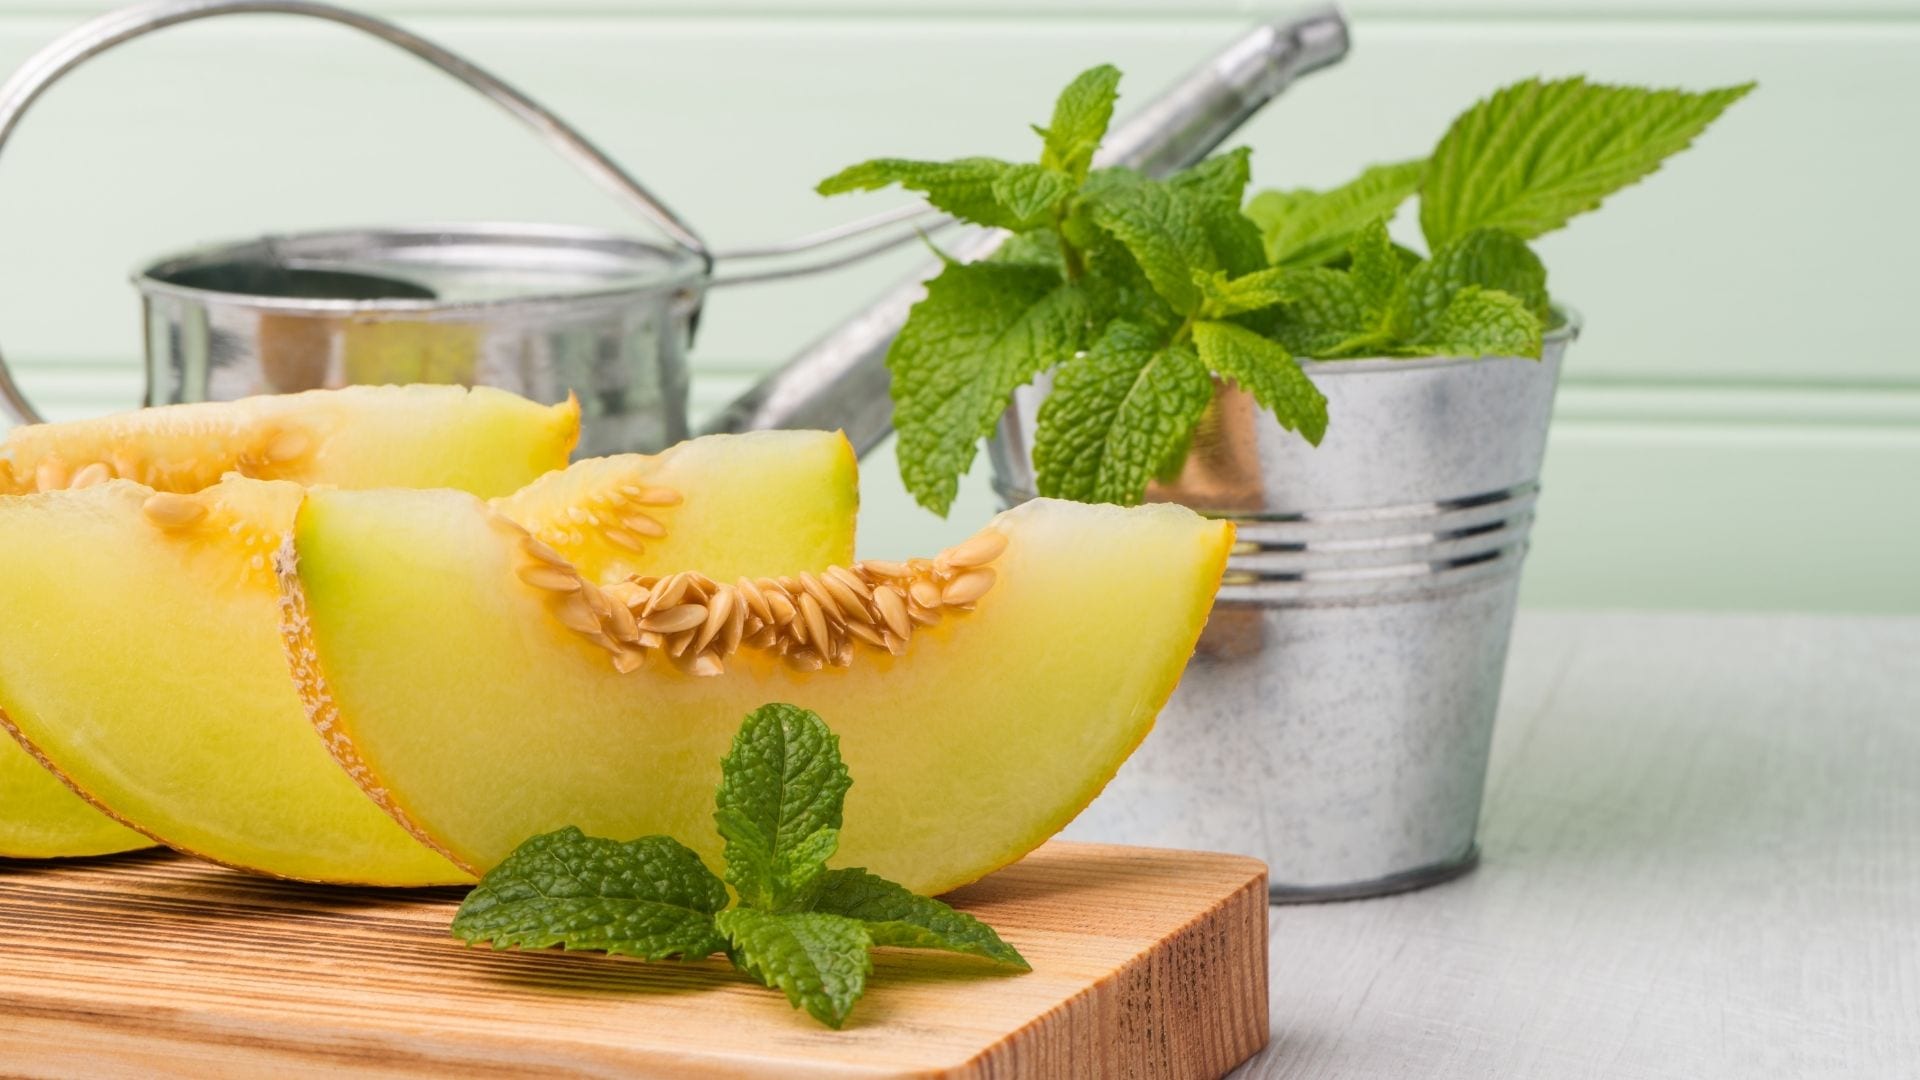 How To Store Cut Honeydew Melon